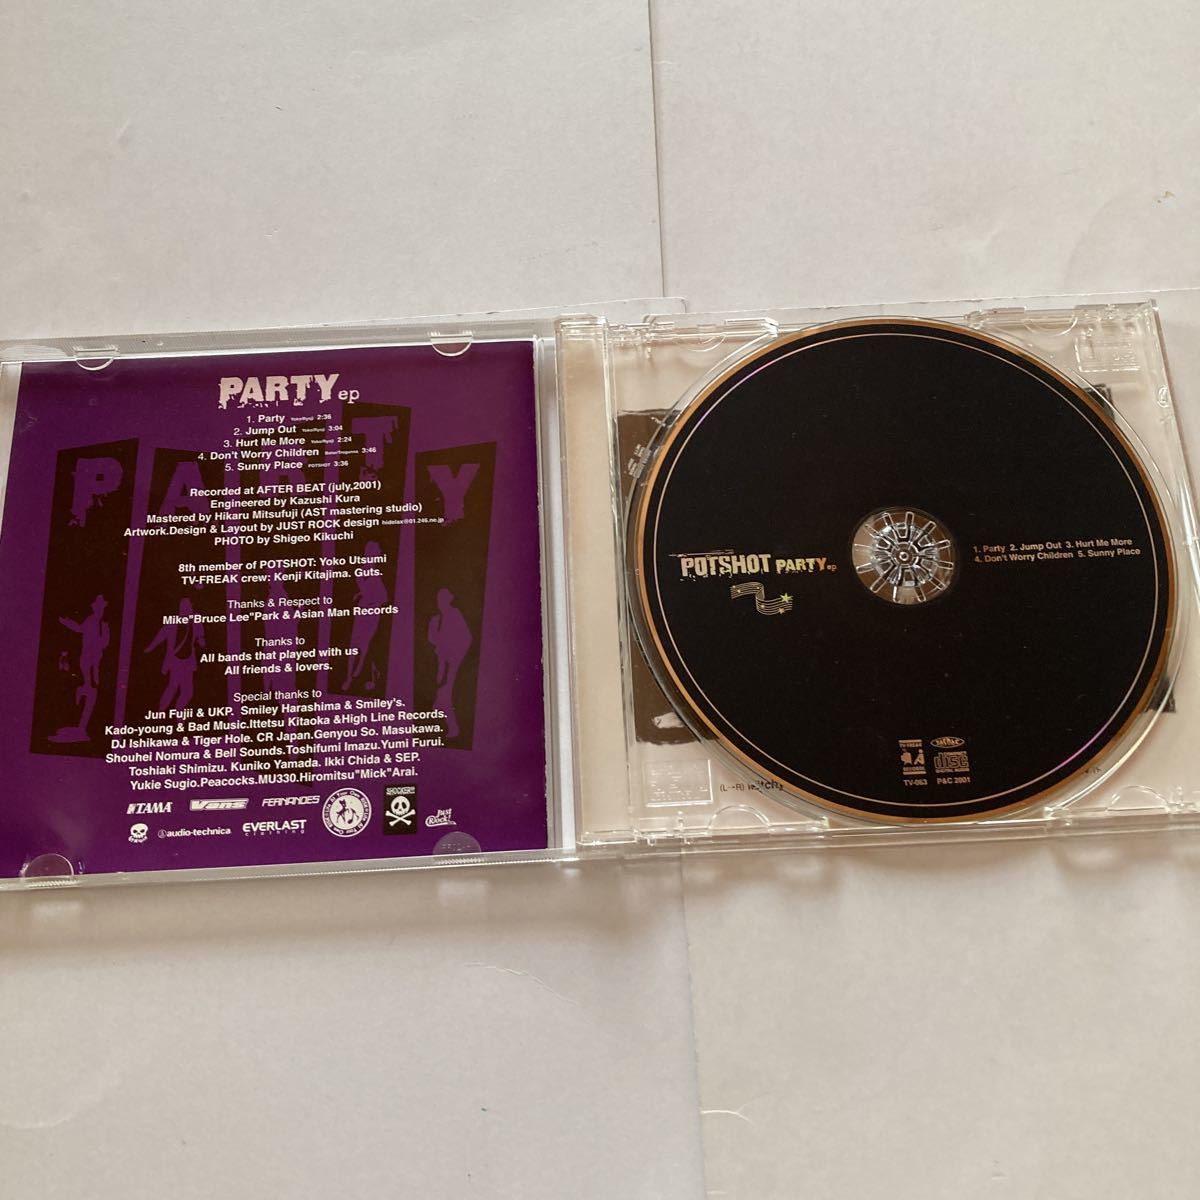 POTSHOT PARTY ep / Party Jump Out Hurt Me More Don't Worry Children Sunny Place / ポットショット スカコア メロコア スカパンク_画像2